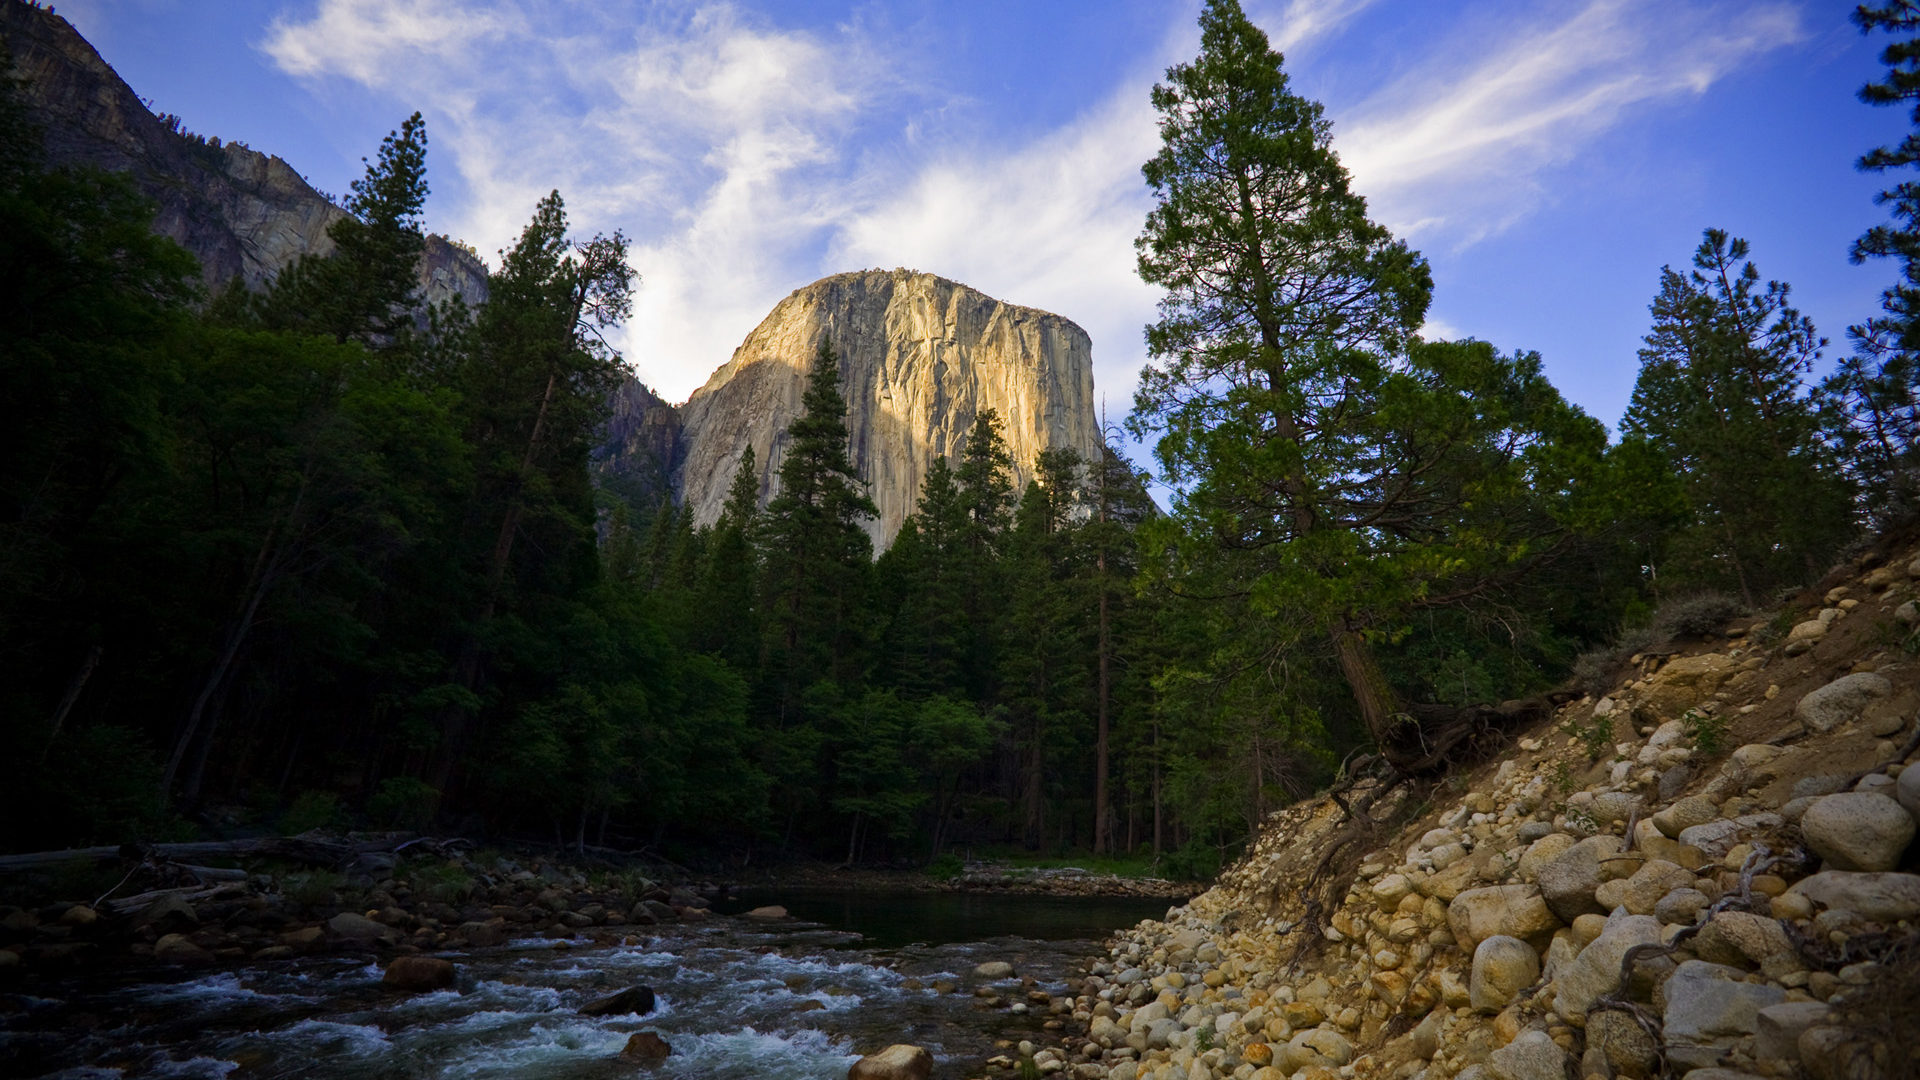 El Capitan Best Background Full HD1920x1080p, 1280x720p, – HD Wallpapers Backgrounds Desktop, iphone & Android Free Download